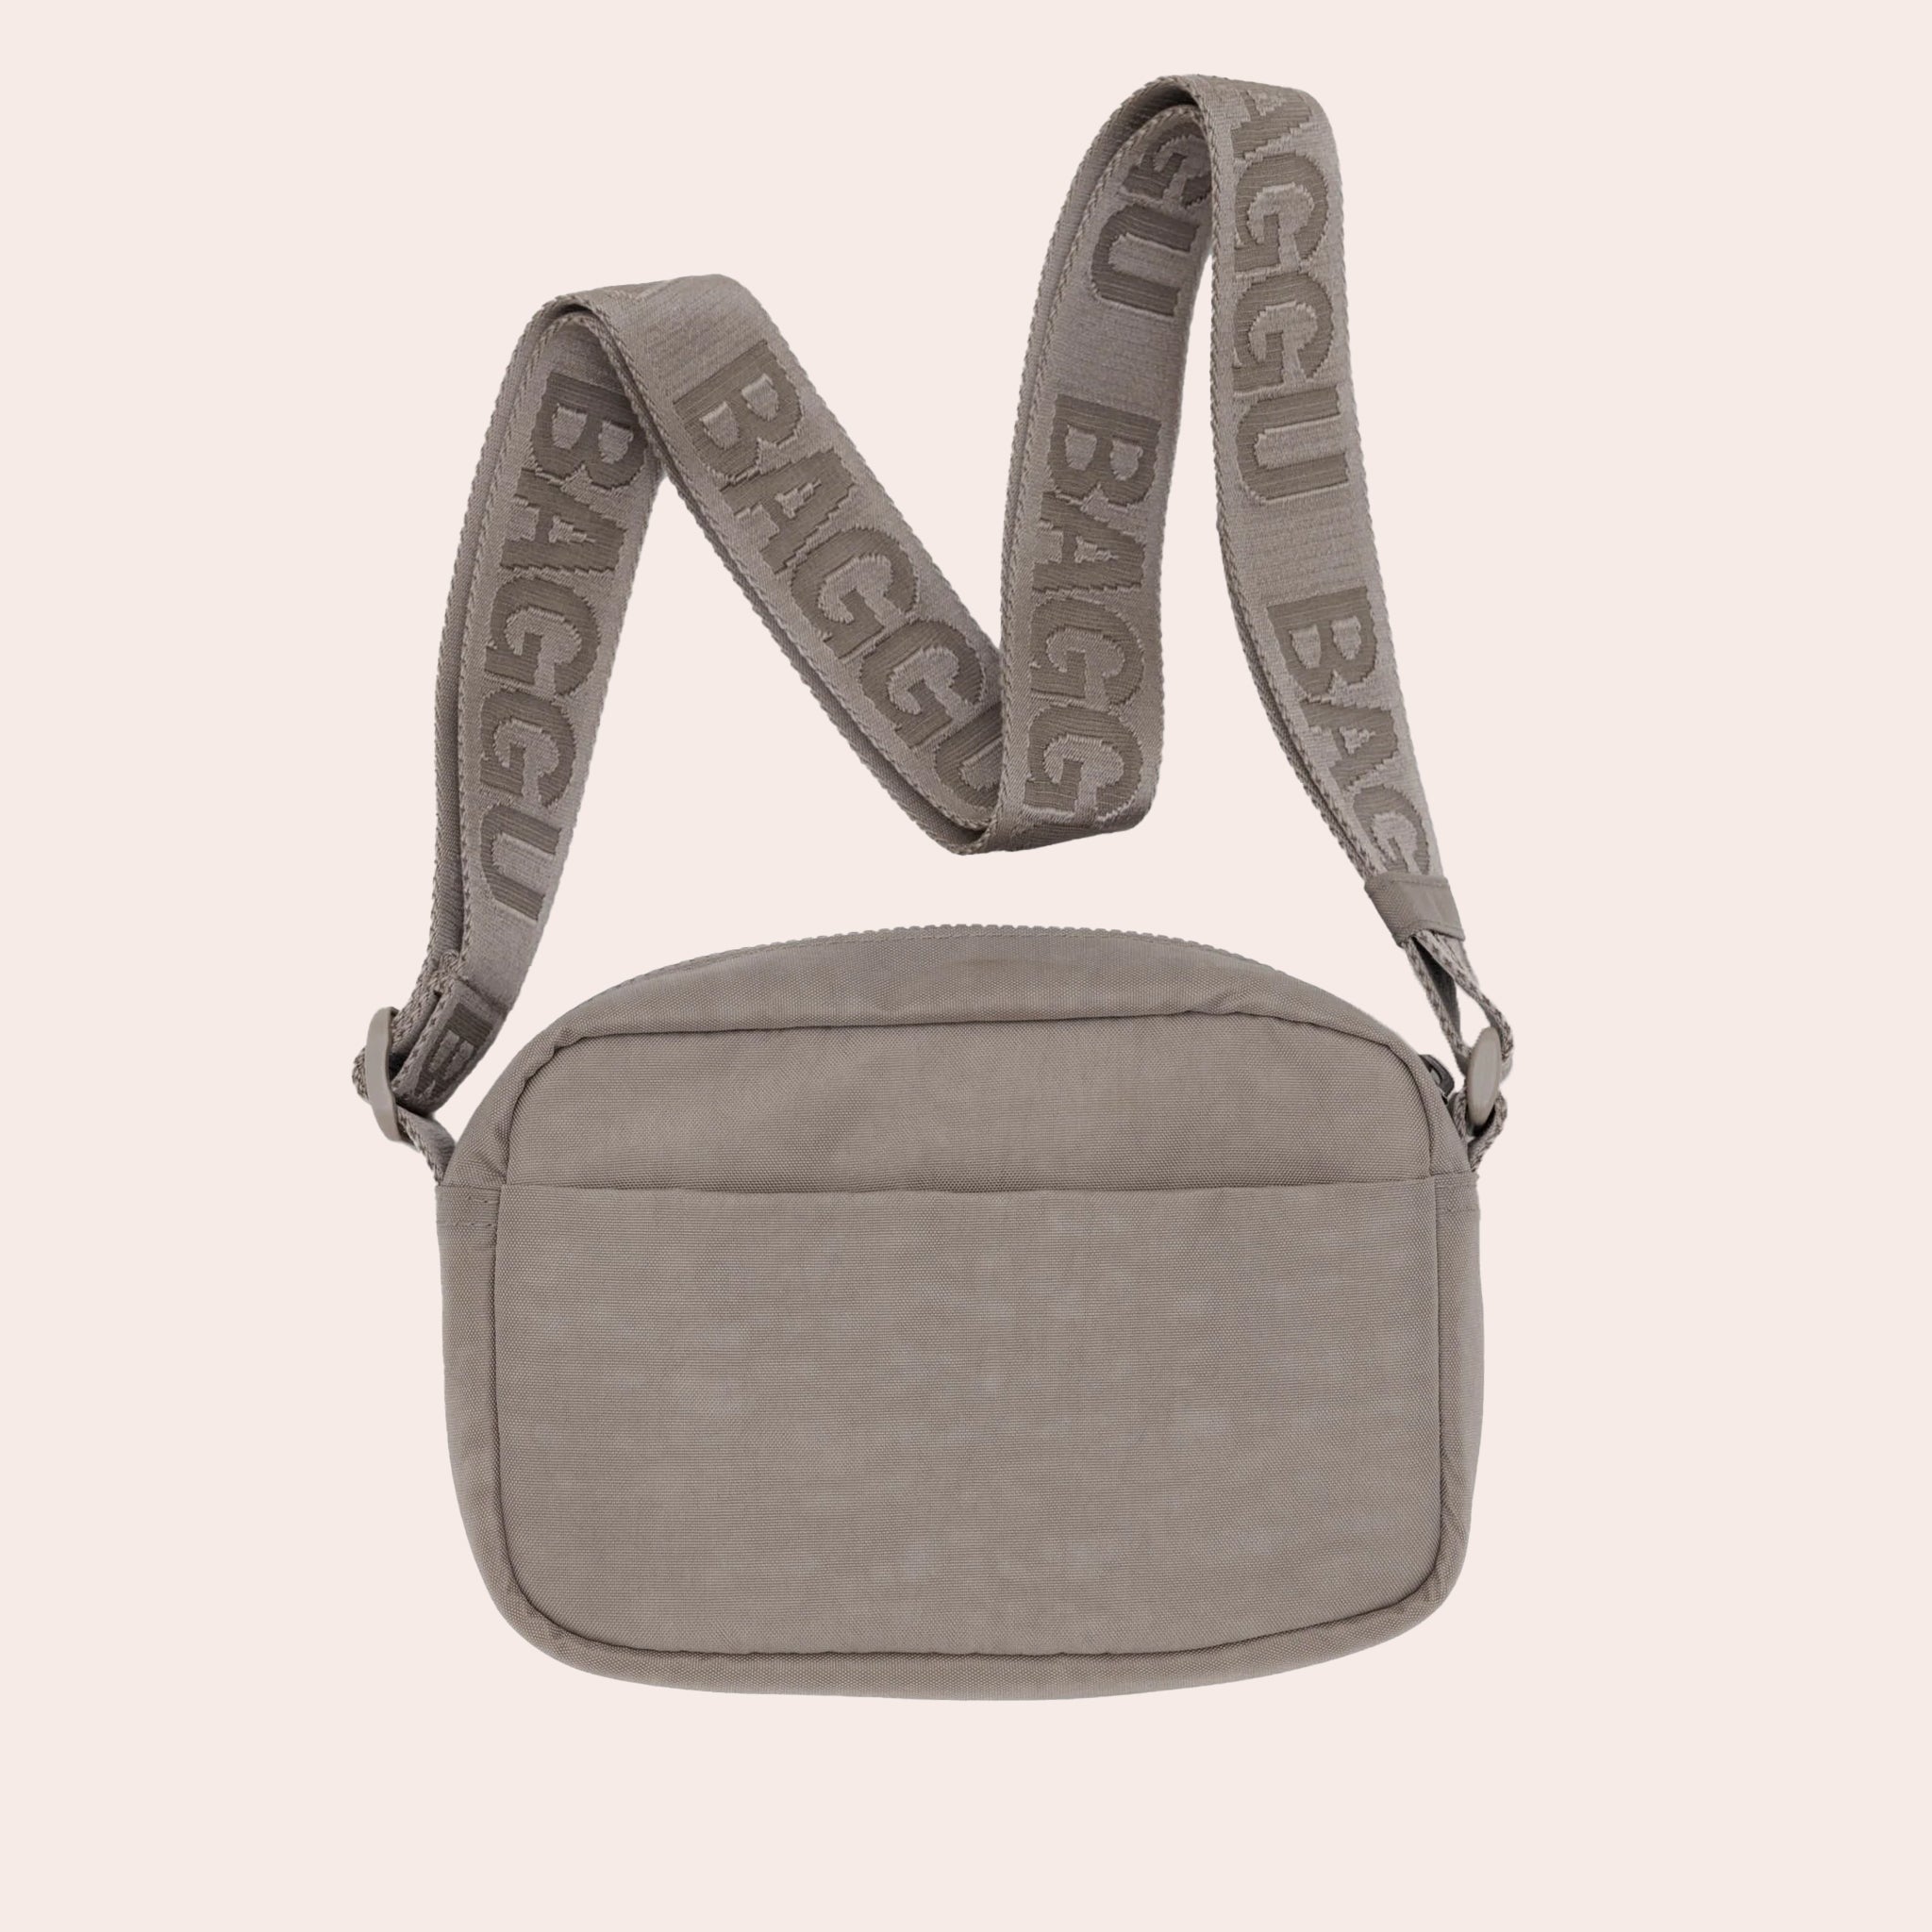 A tannish grey colored crossbody bag with an adjustable strap. 